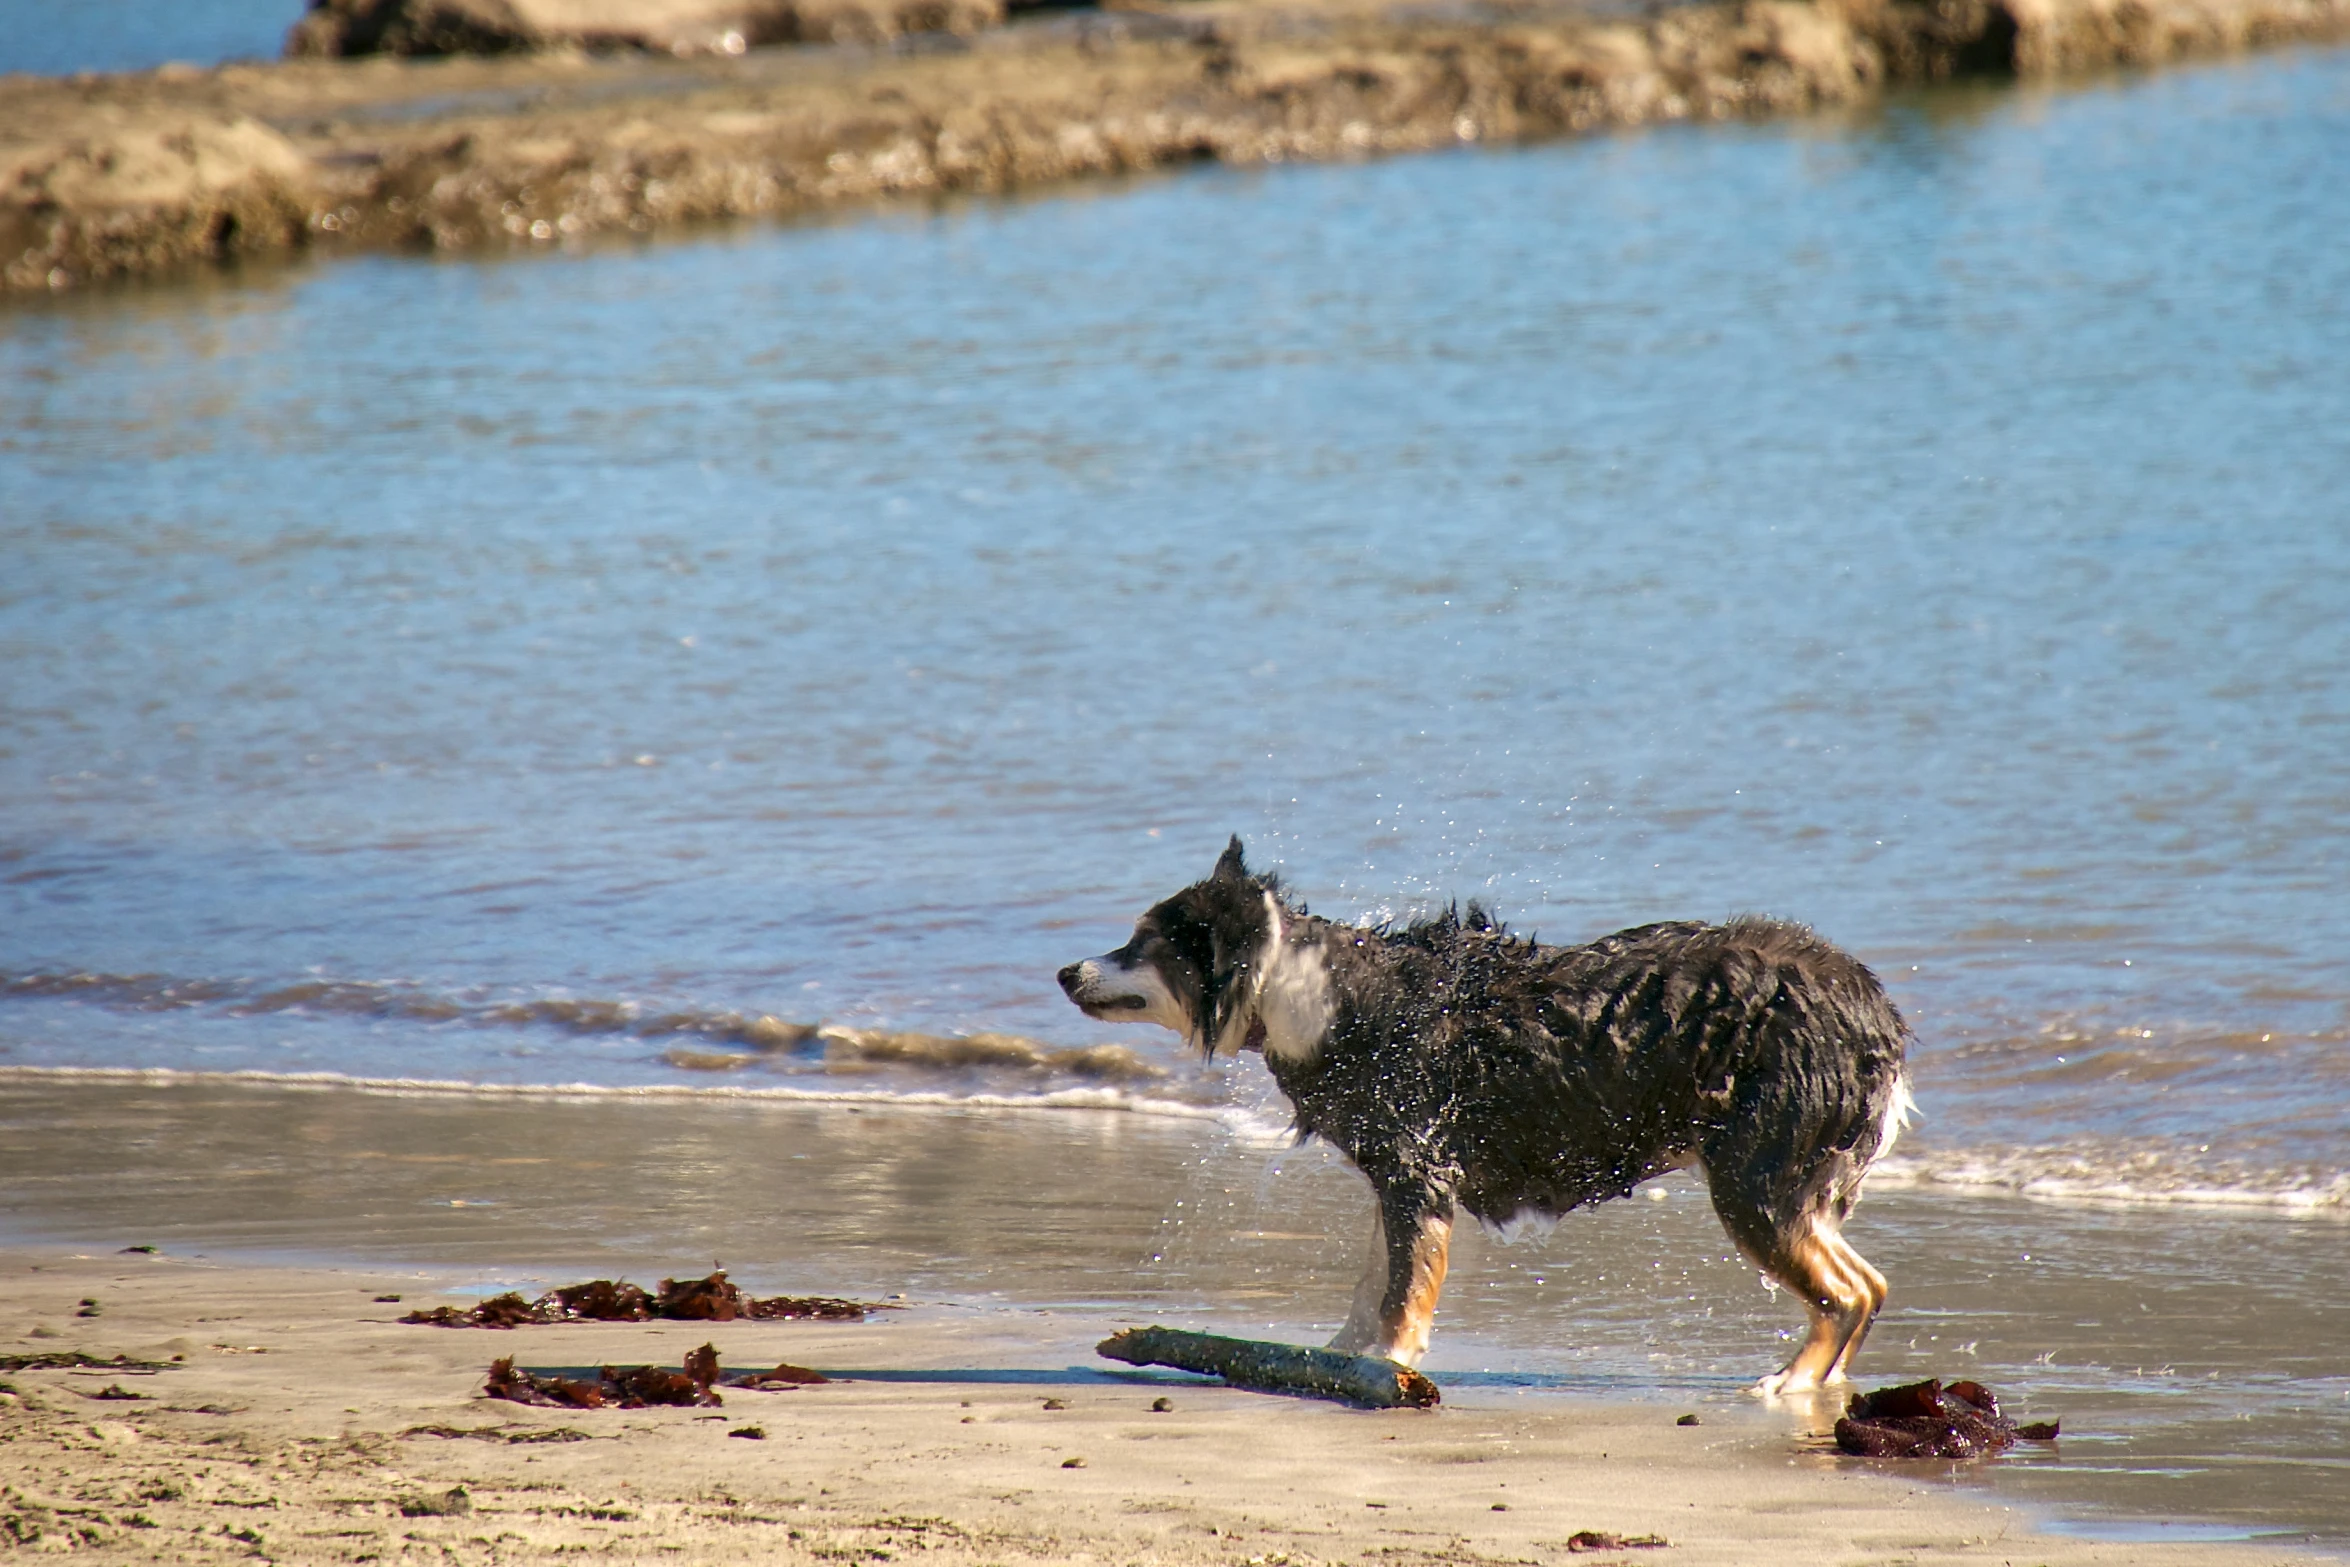 the dog is playing in the water near the shore